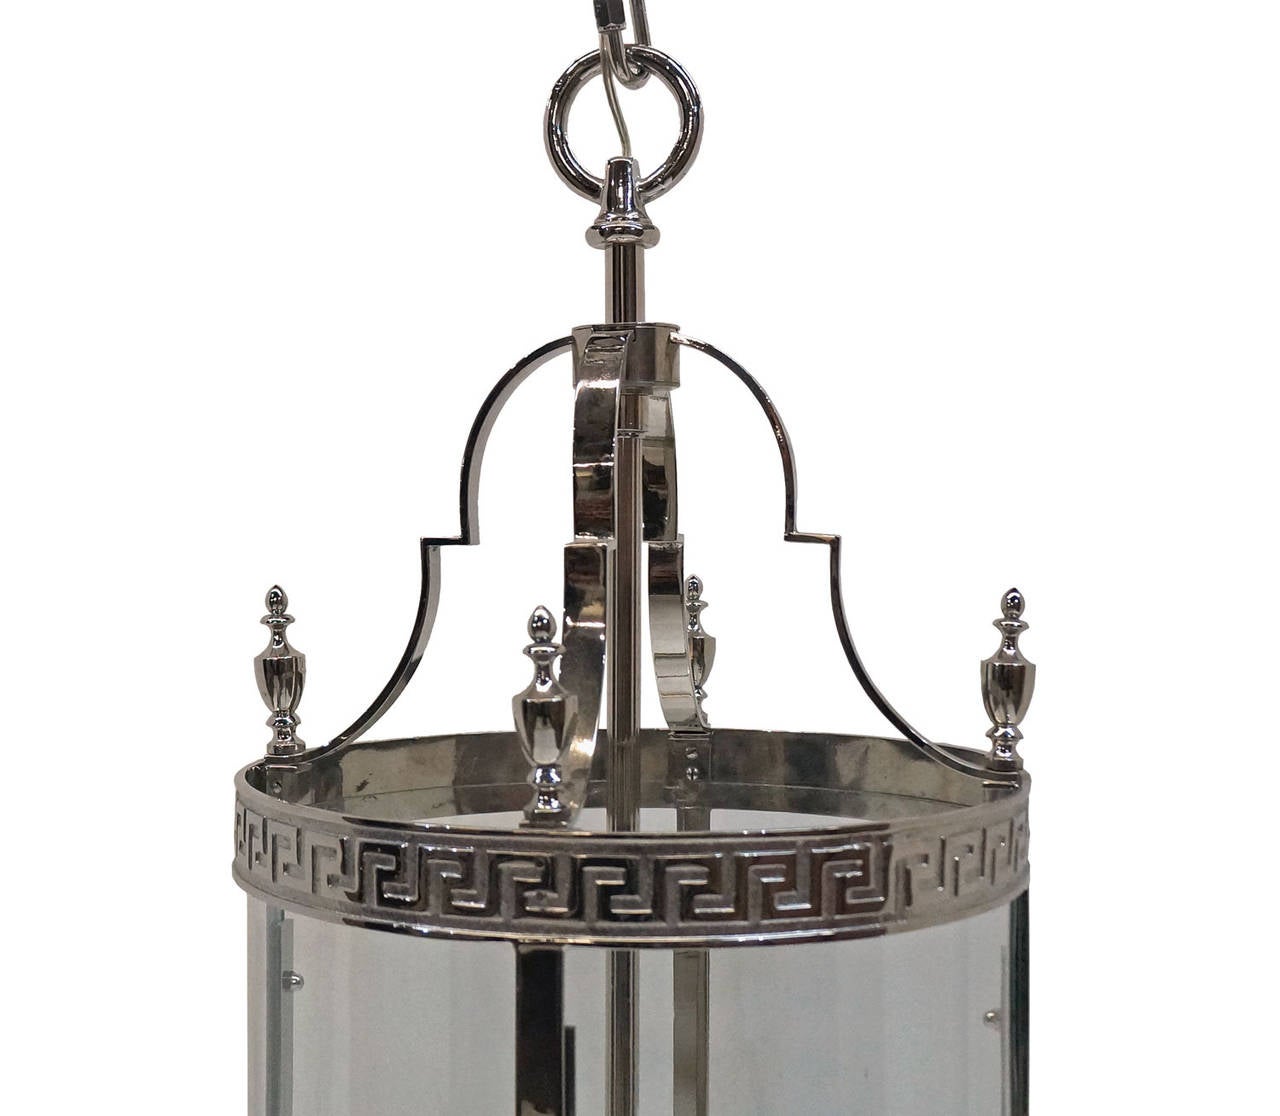 Fine neoclassical hall lantern. The cylindrical body, below four circular finials, enclosing a four branch light fitting.

Not available for sale or to ship in the state of California.